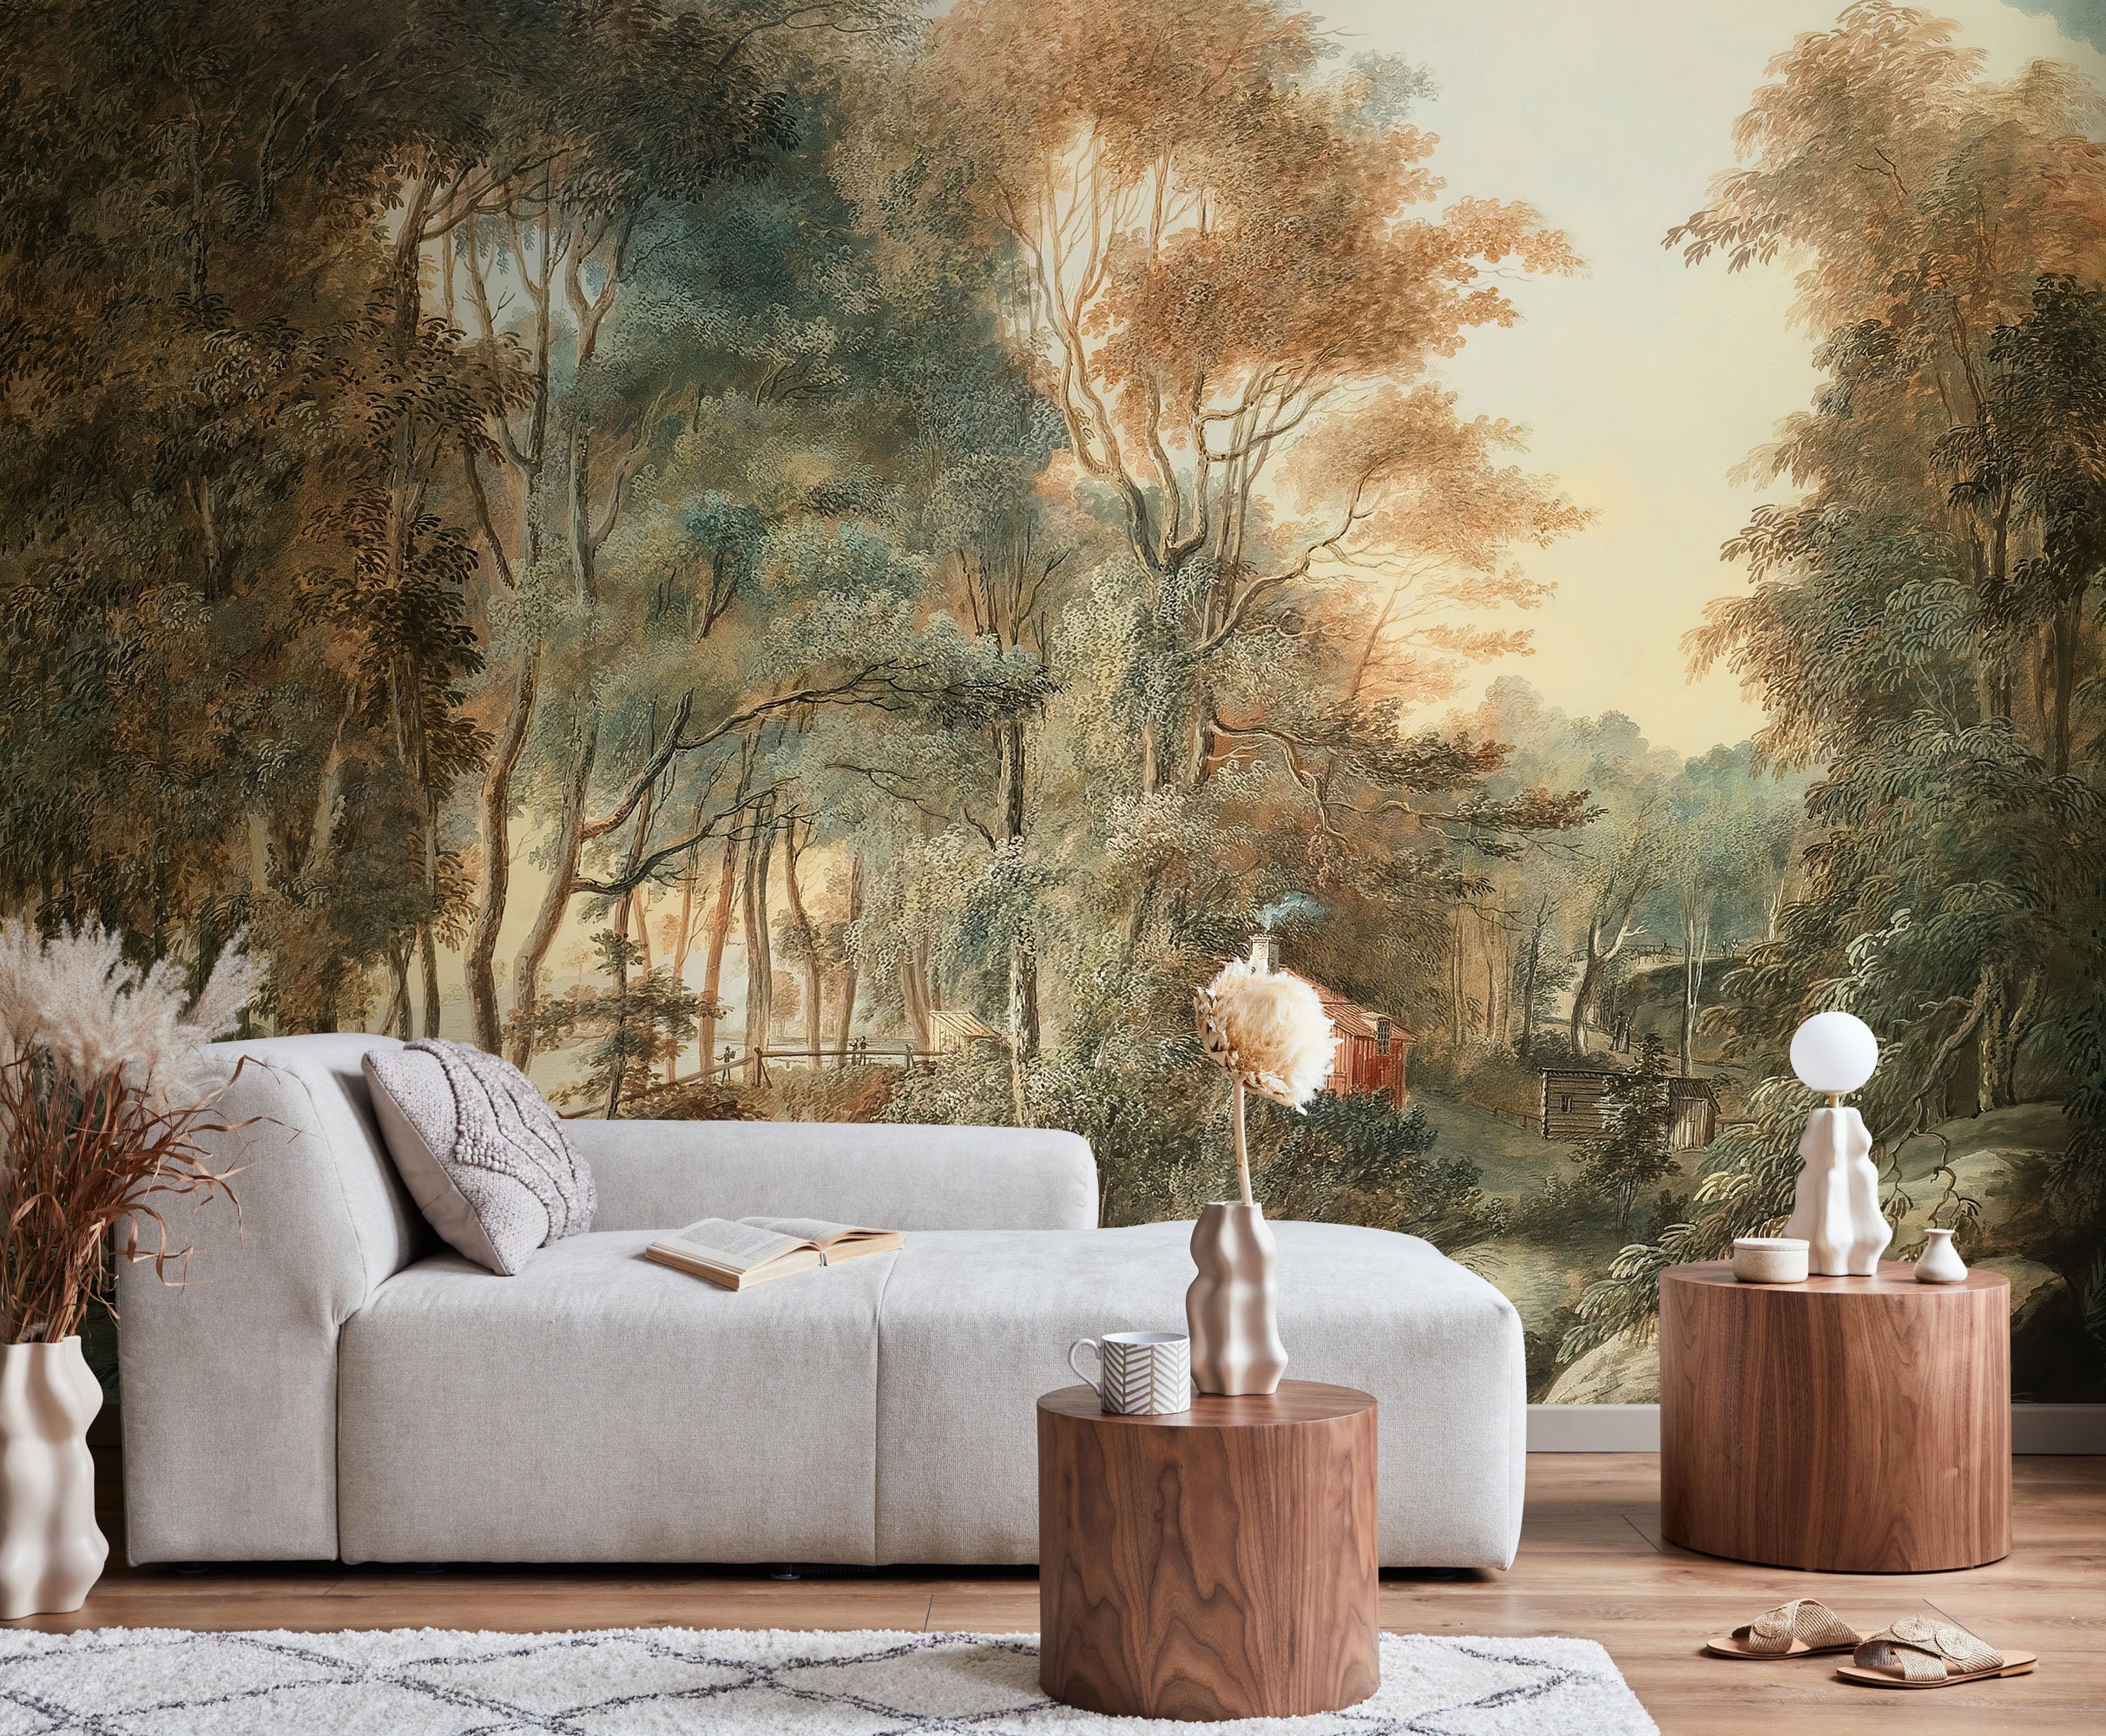 Oil Painting Landscape Wall Mural, Peel and Stick Wallpaper for a Large Wall  Decor, Vintage Decoration. LAN017 